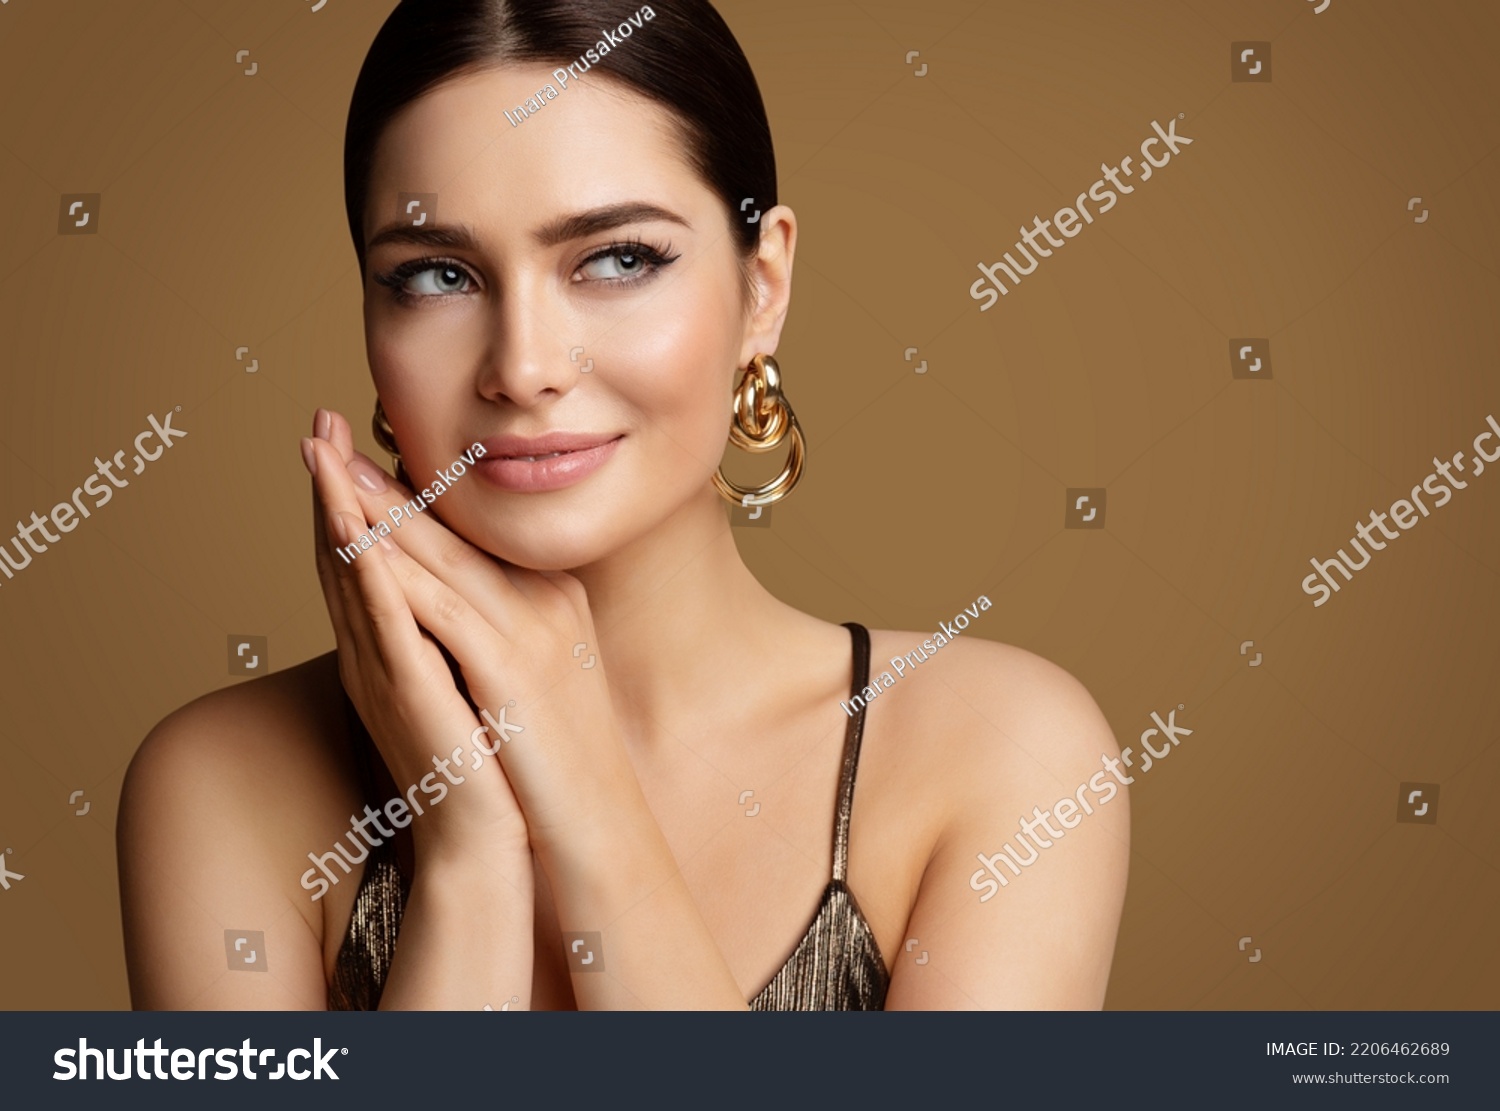 Woman Beauty with Smooth Skin Make up and Golden Jewelry. Beautiful Girl with Perfect Lips and Eye Makeup holding Hands under Chin. Elegant Model Portrait with Gold Earring smiling #2206462689